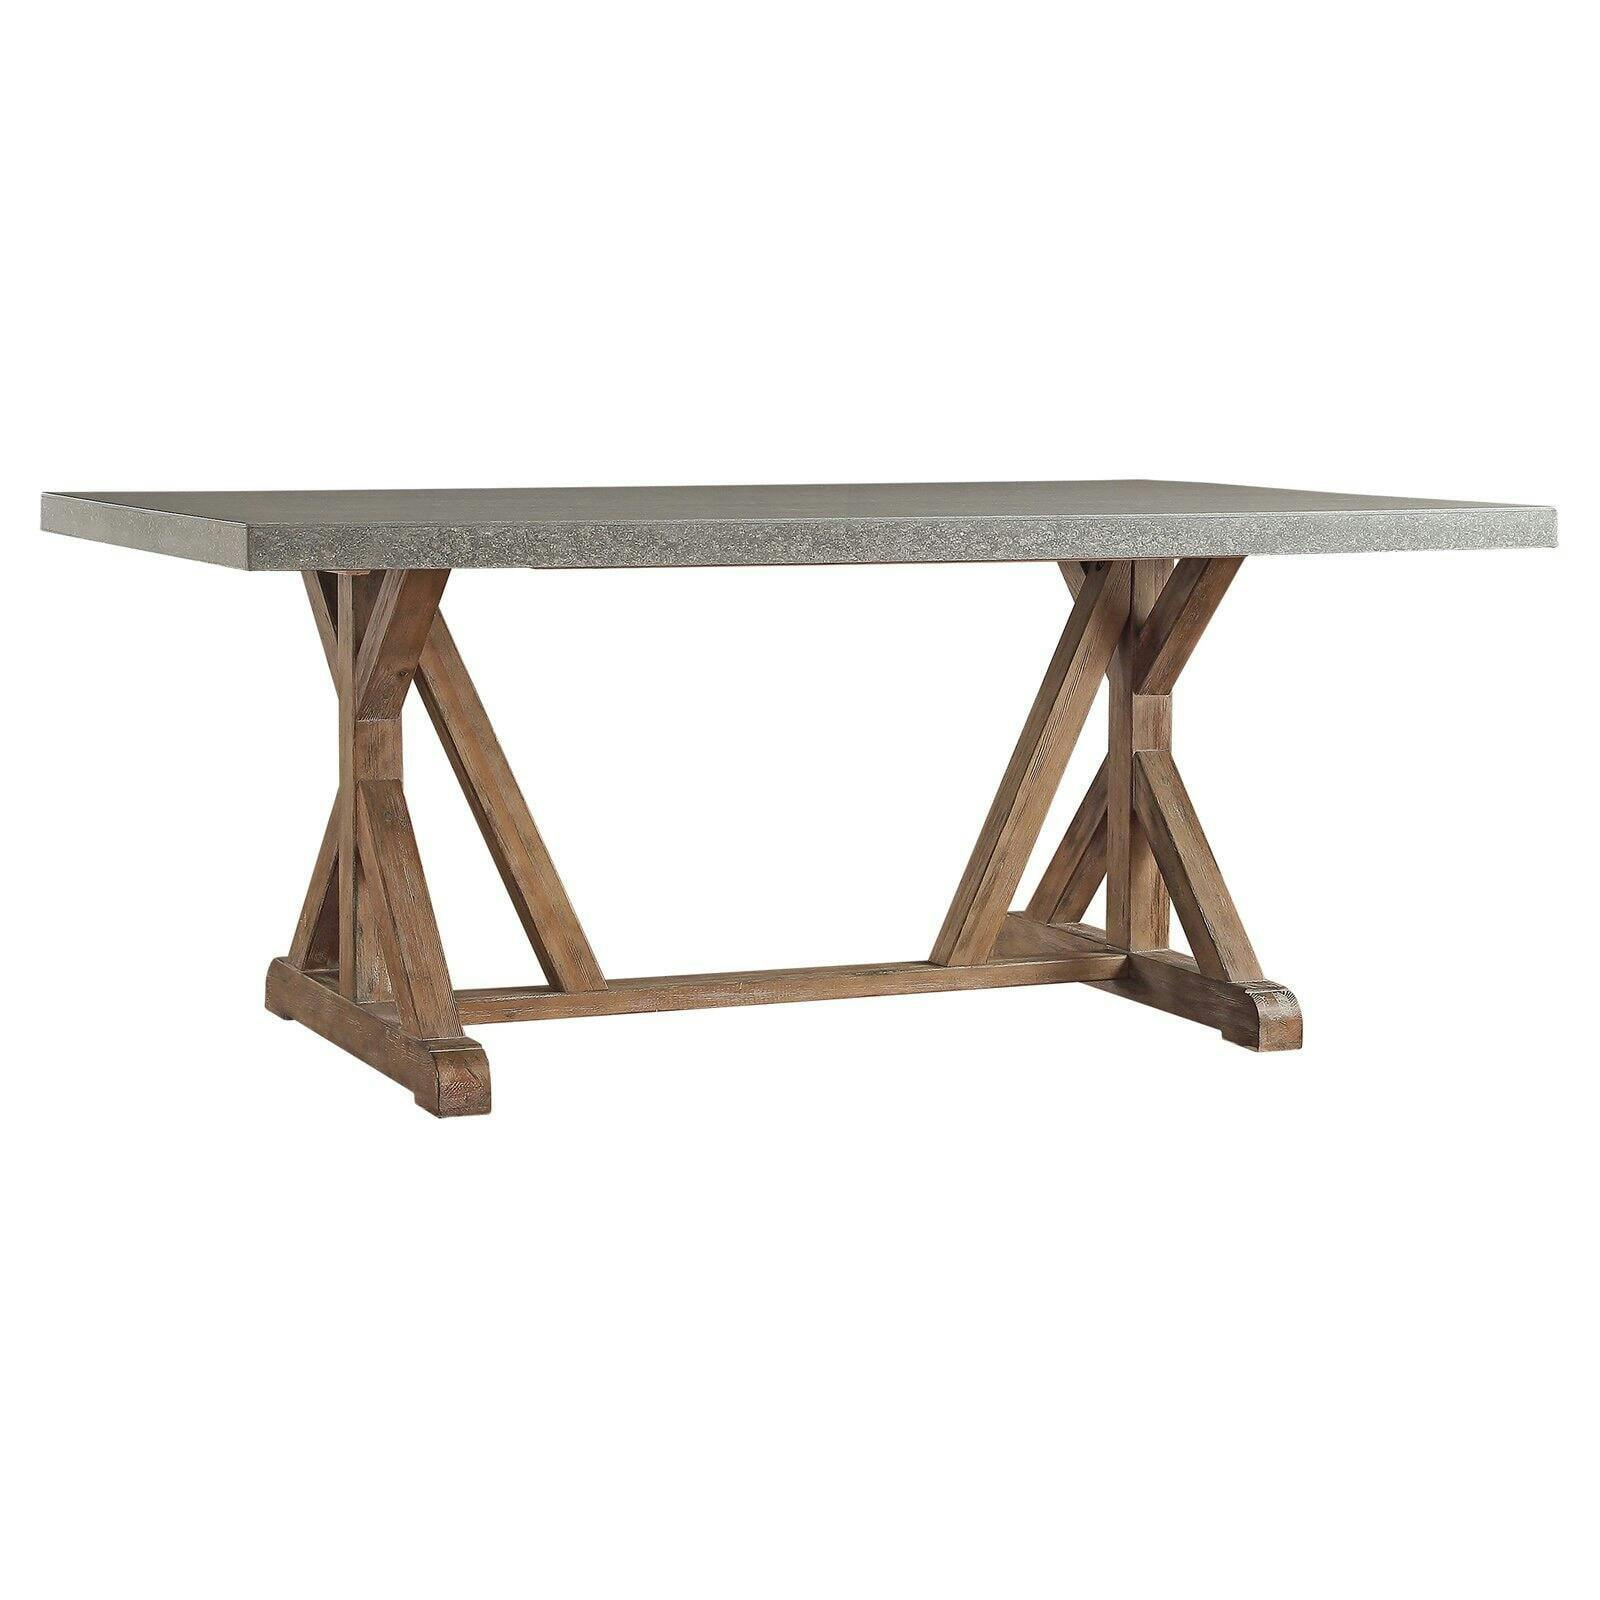 Rustic Reclaimed Wood Dining Table with Concrete Top, Seats 6